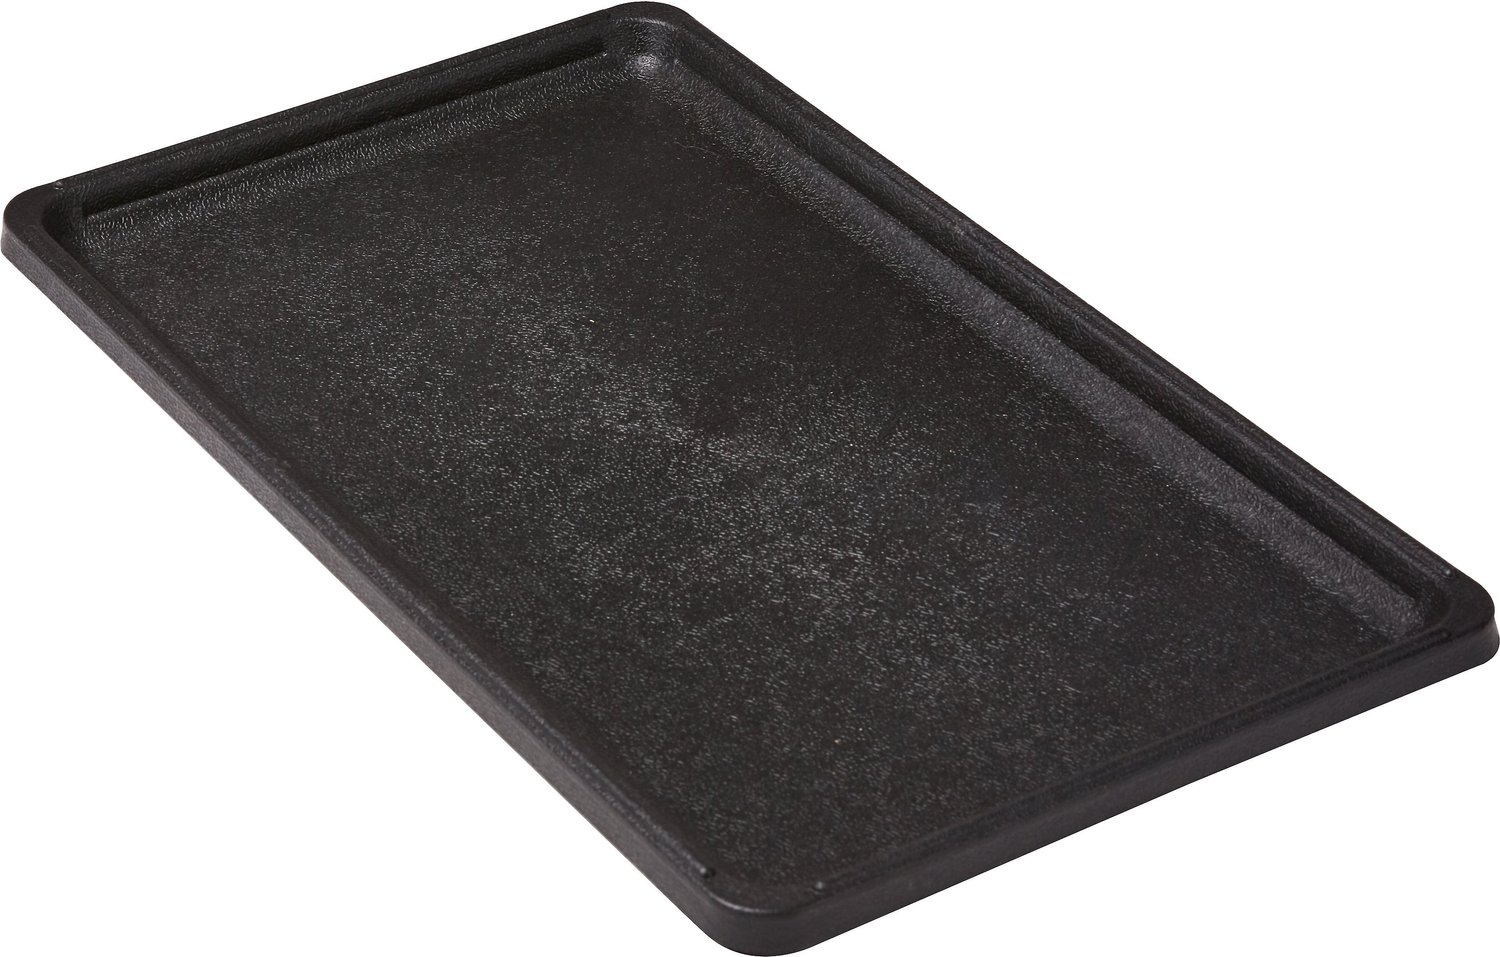 retriever kennel replacement tray